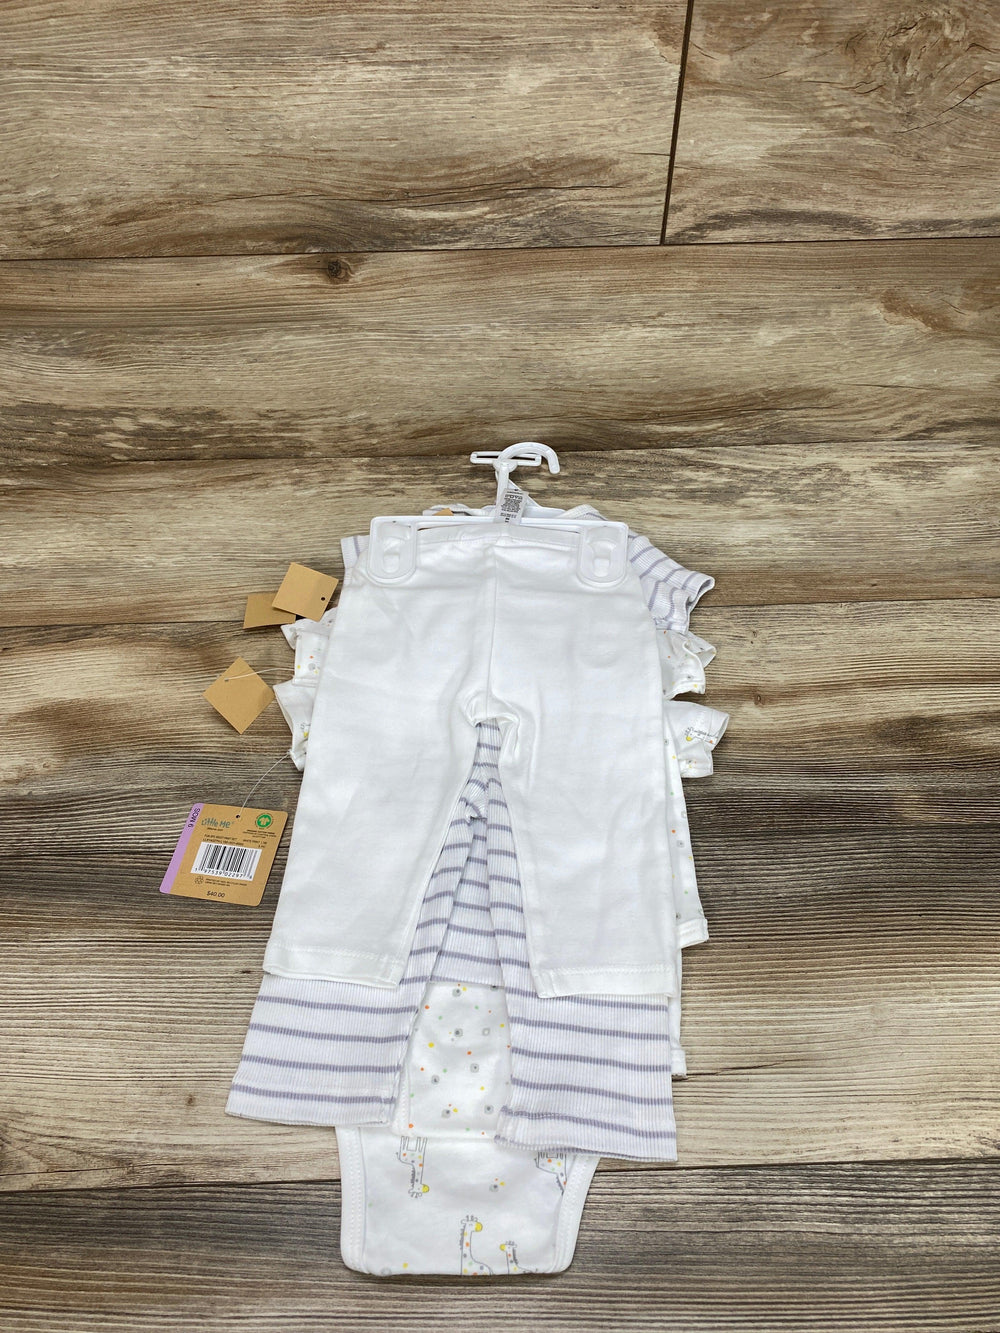 NEW Little Me White 5pc Bodysuit Set sz 9m - Me 'n Mommy To Be